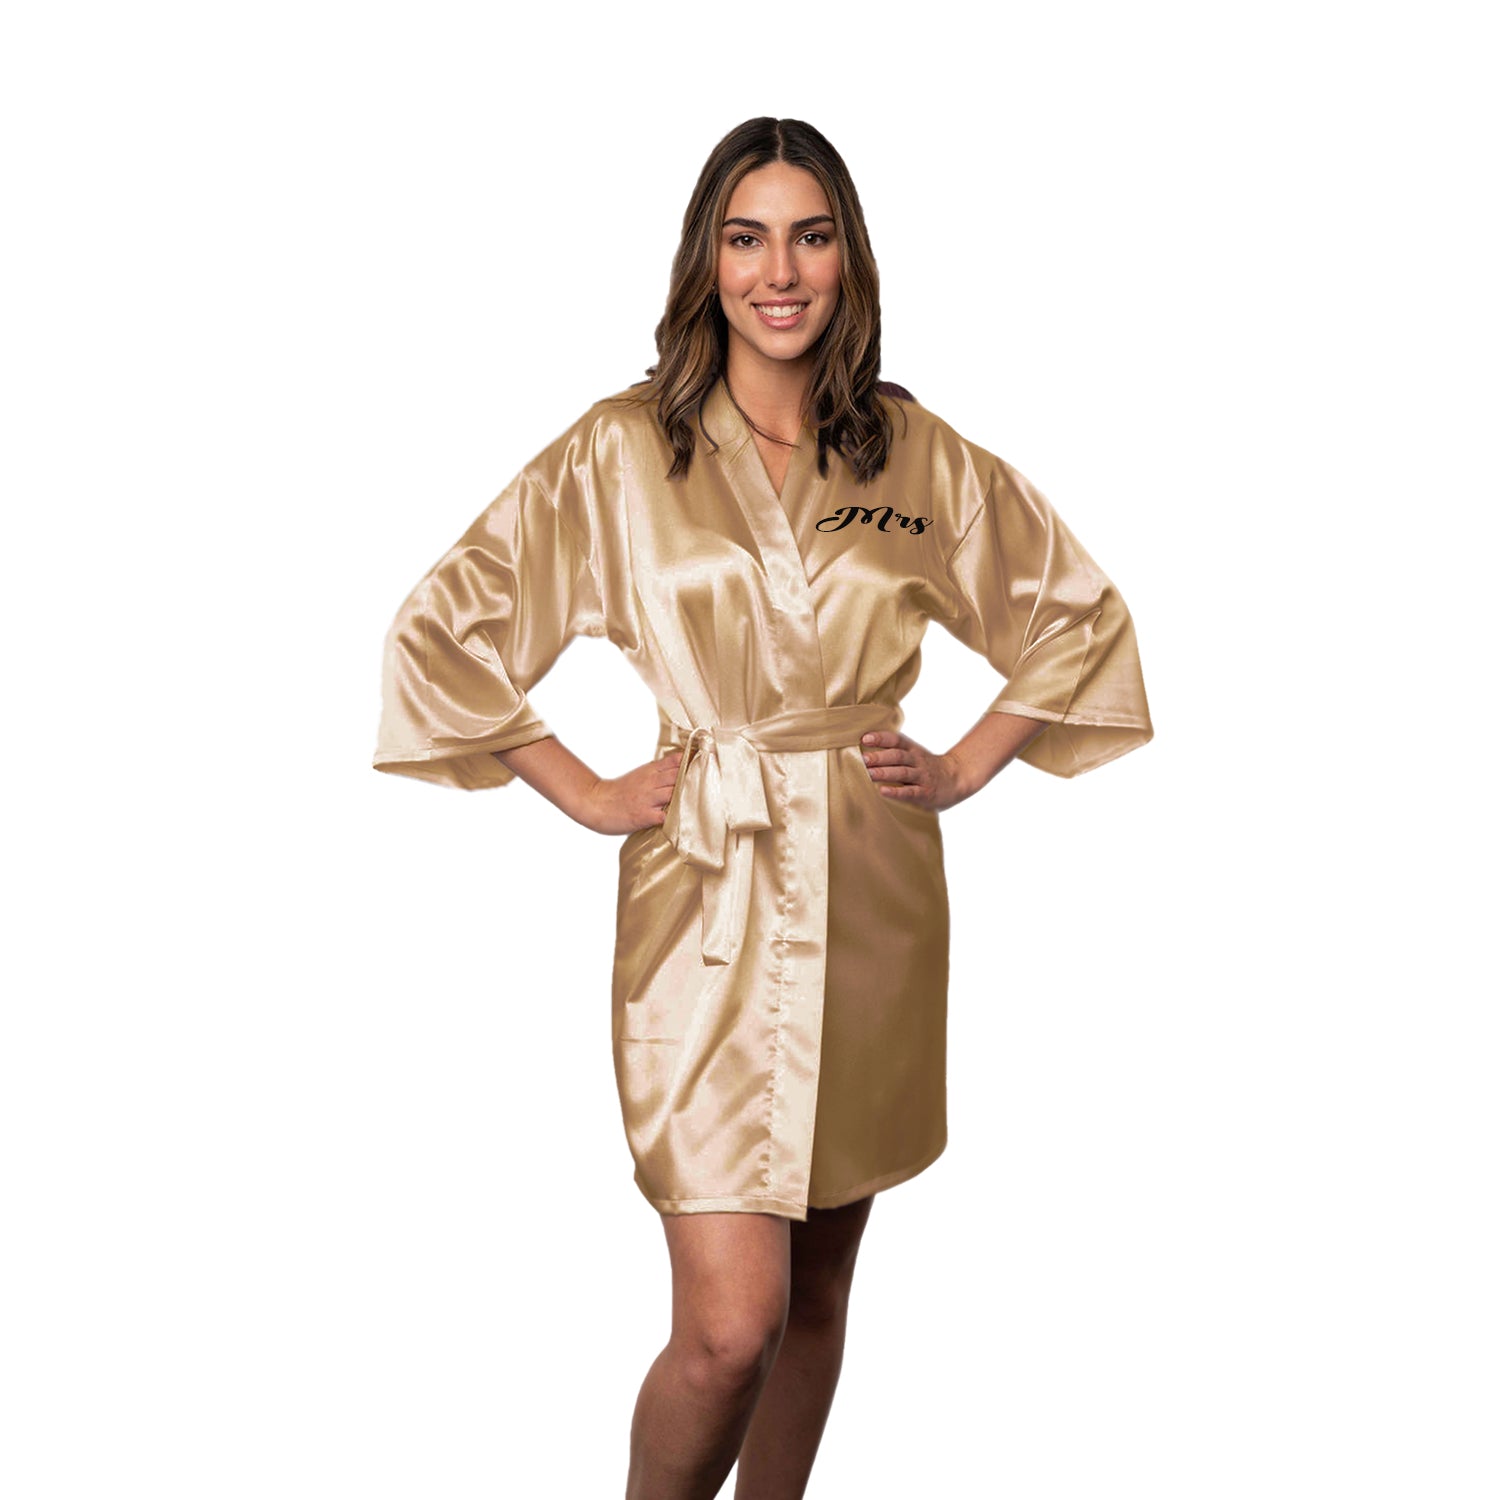 Bridesmaid Robe Set of 5, Personalized Robes in Front & Back, 26 Colors, 3T-6XL